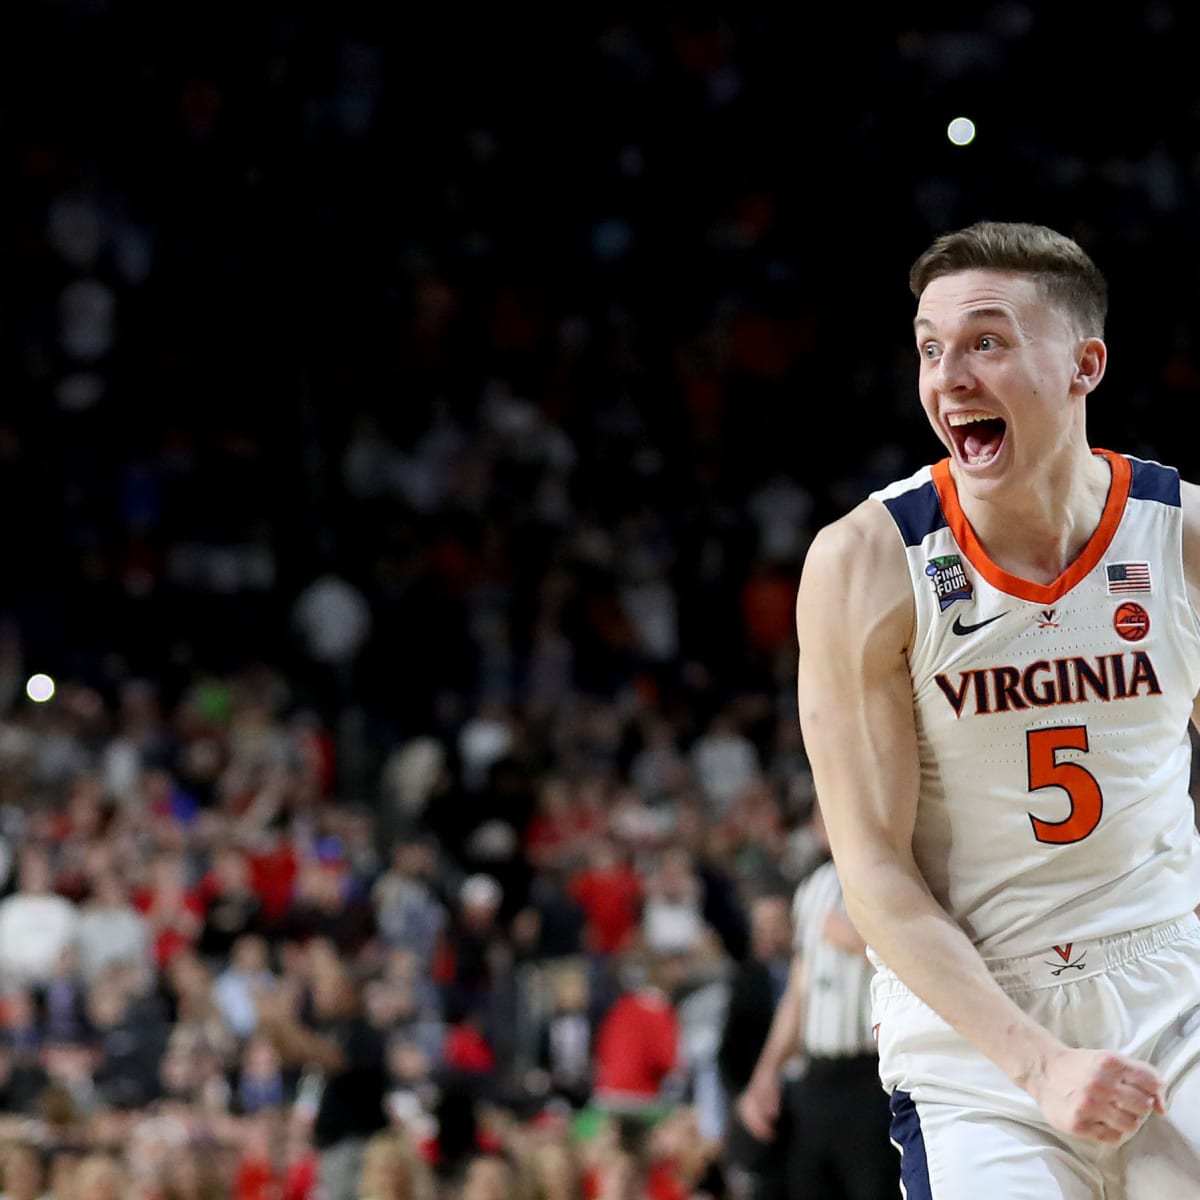 Does Kyle Guy deserve consideration for the 2019 NBA Draft?